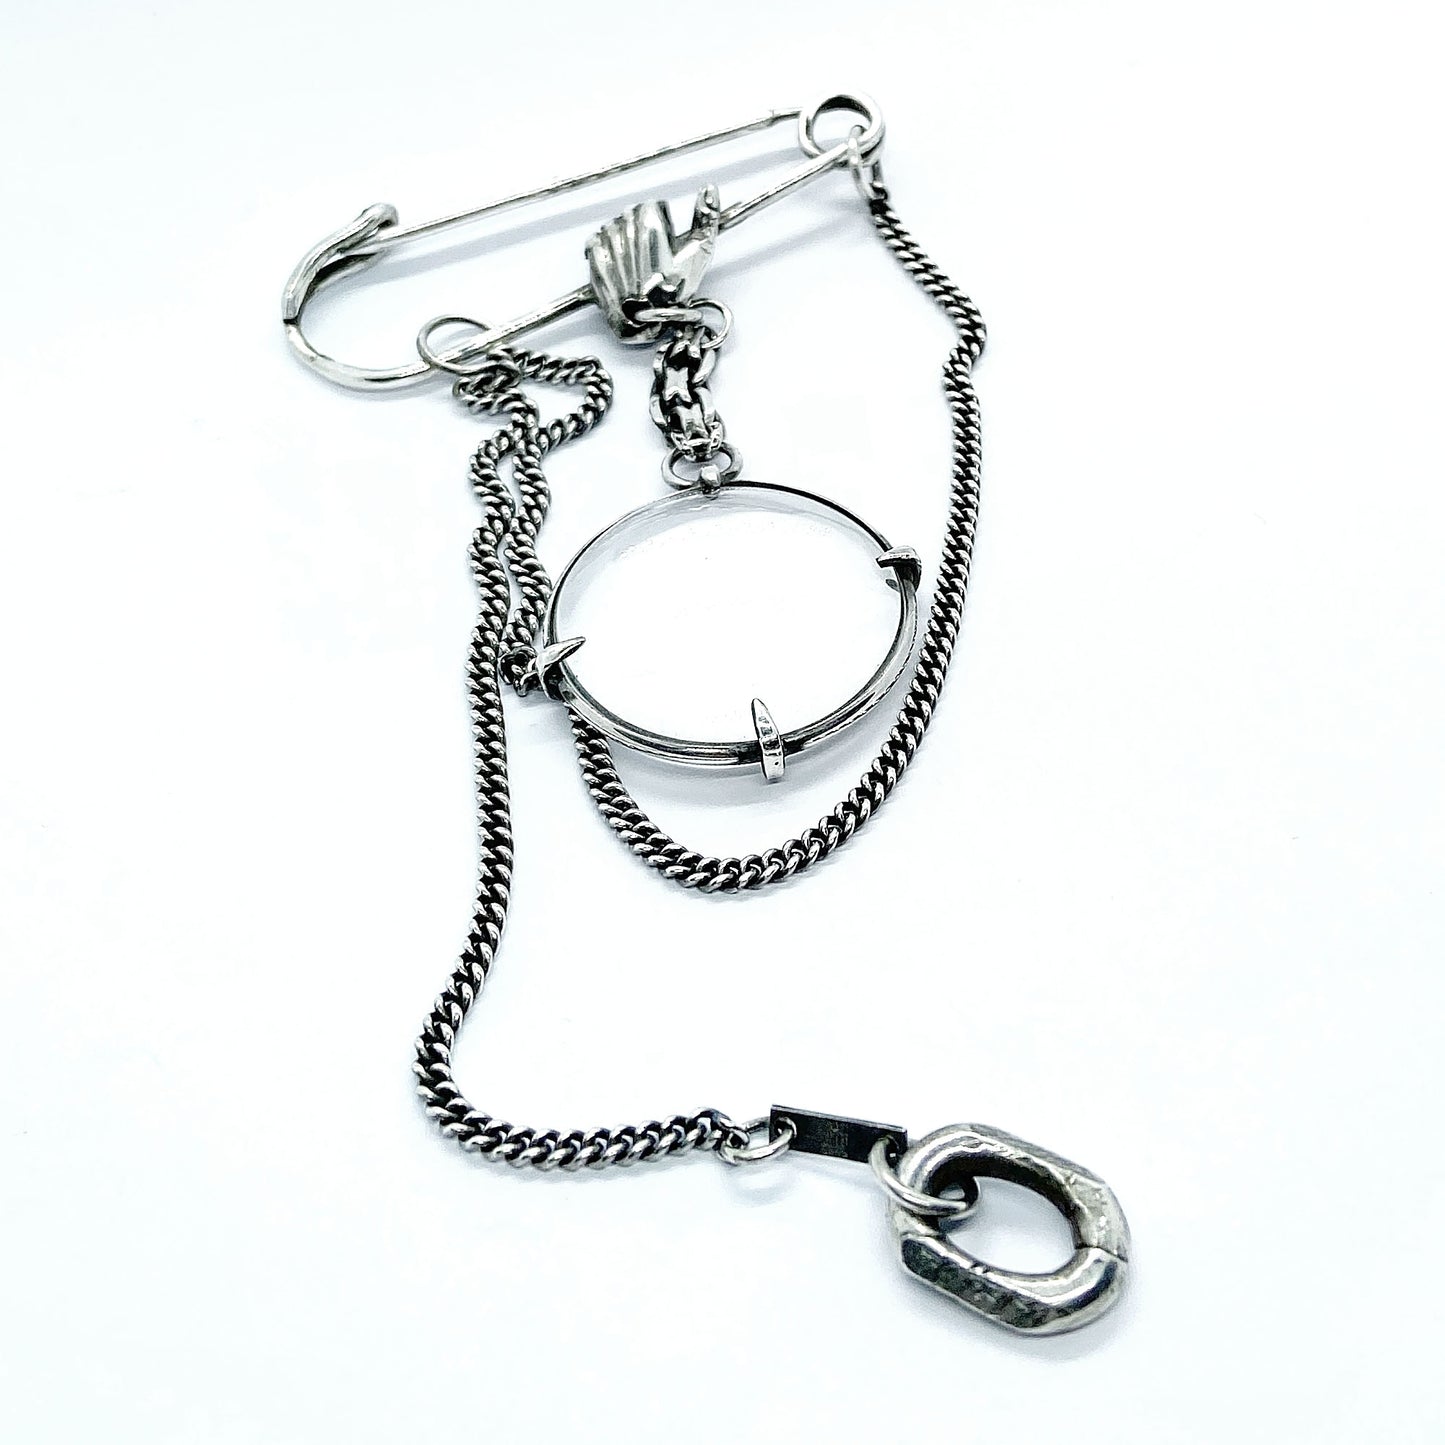 Magnifying glass brooch.